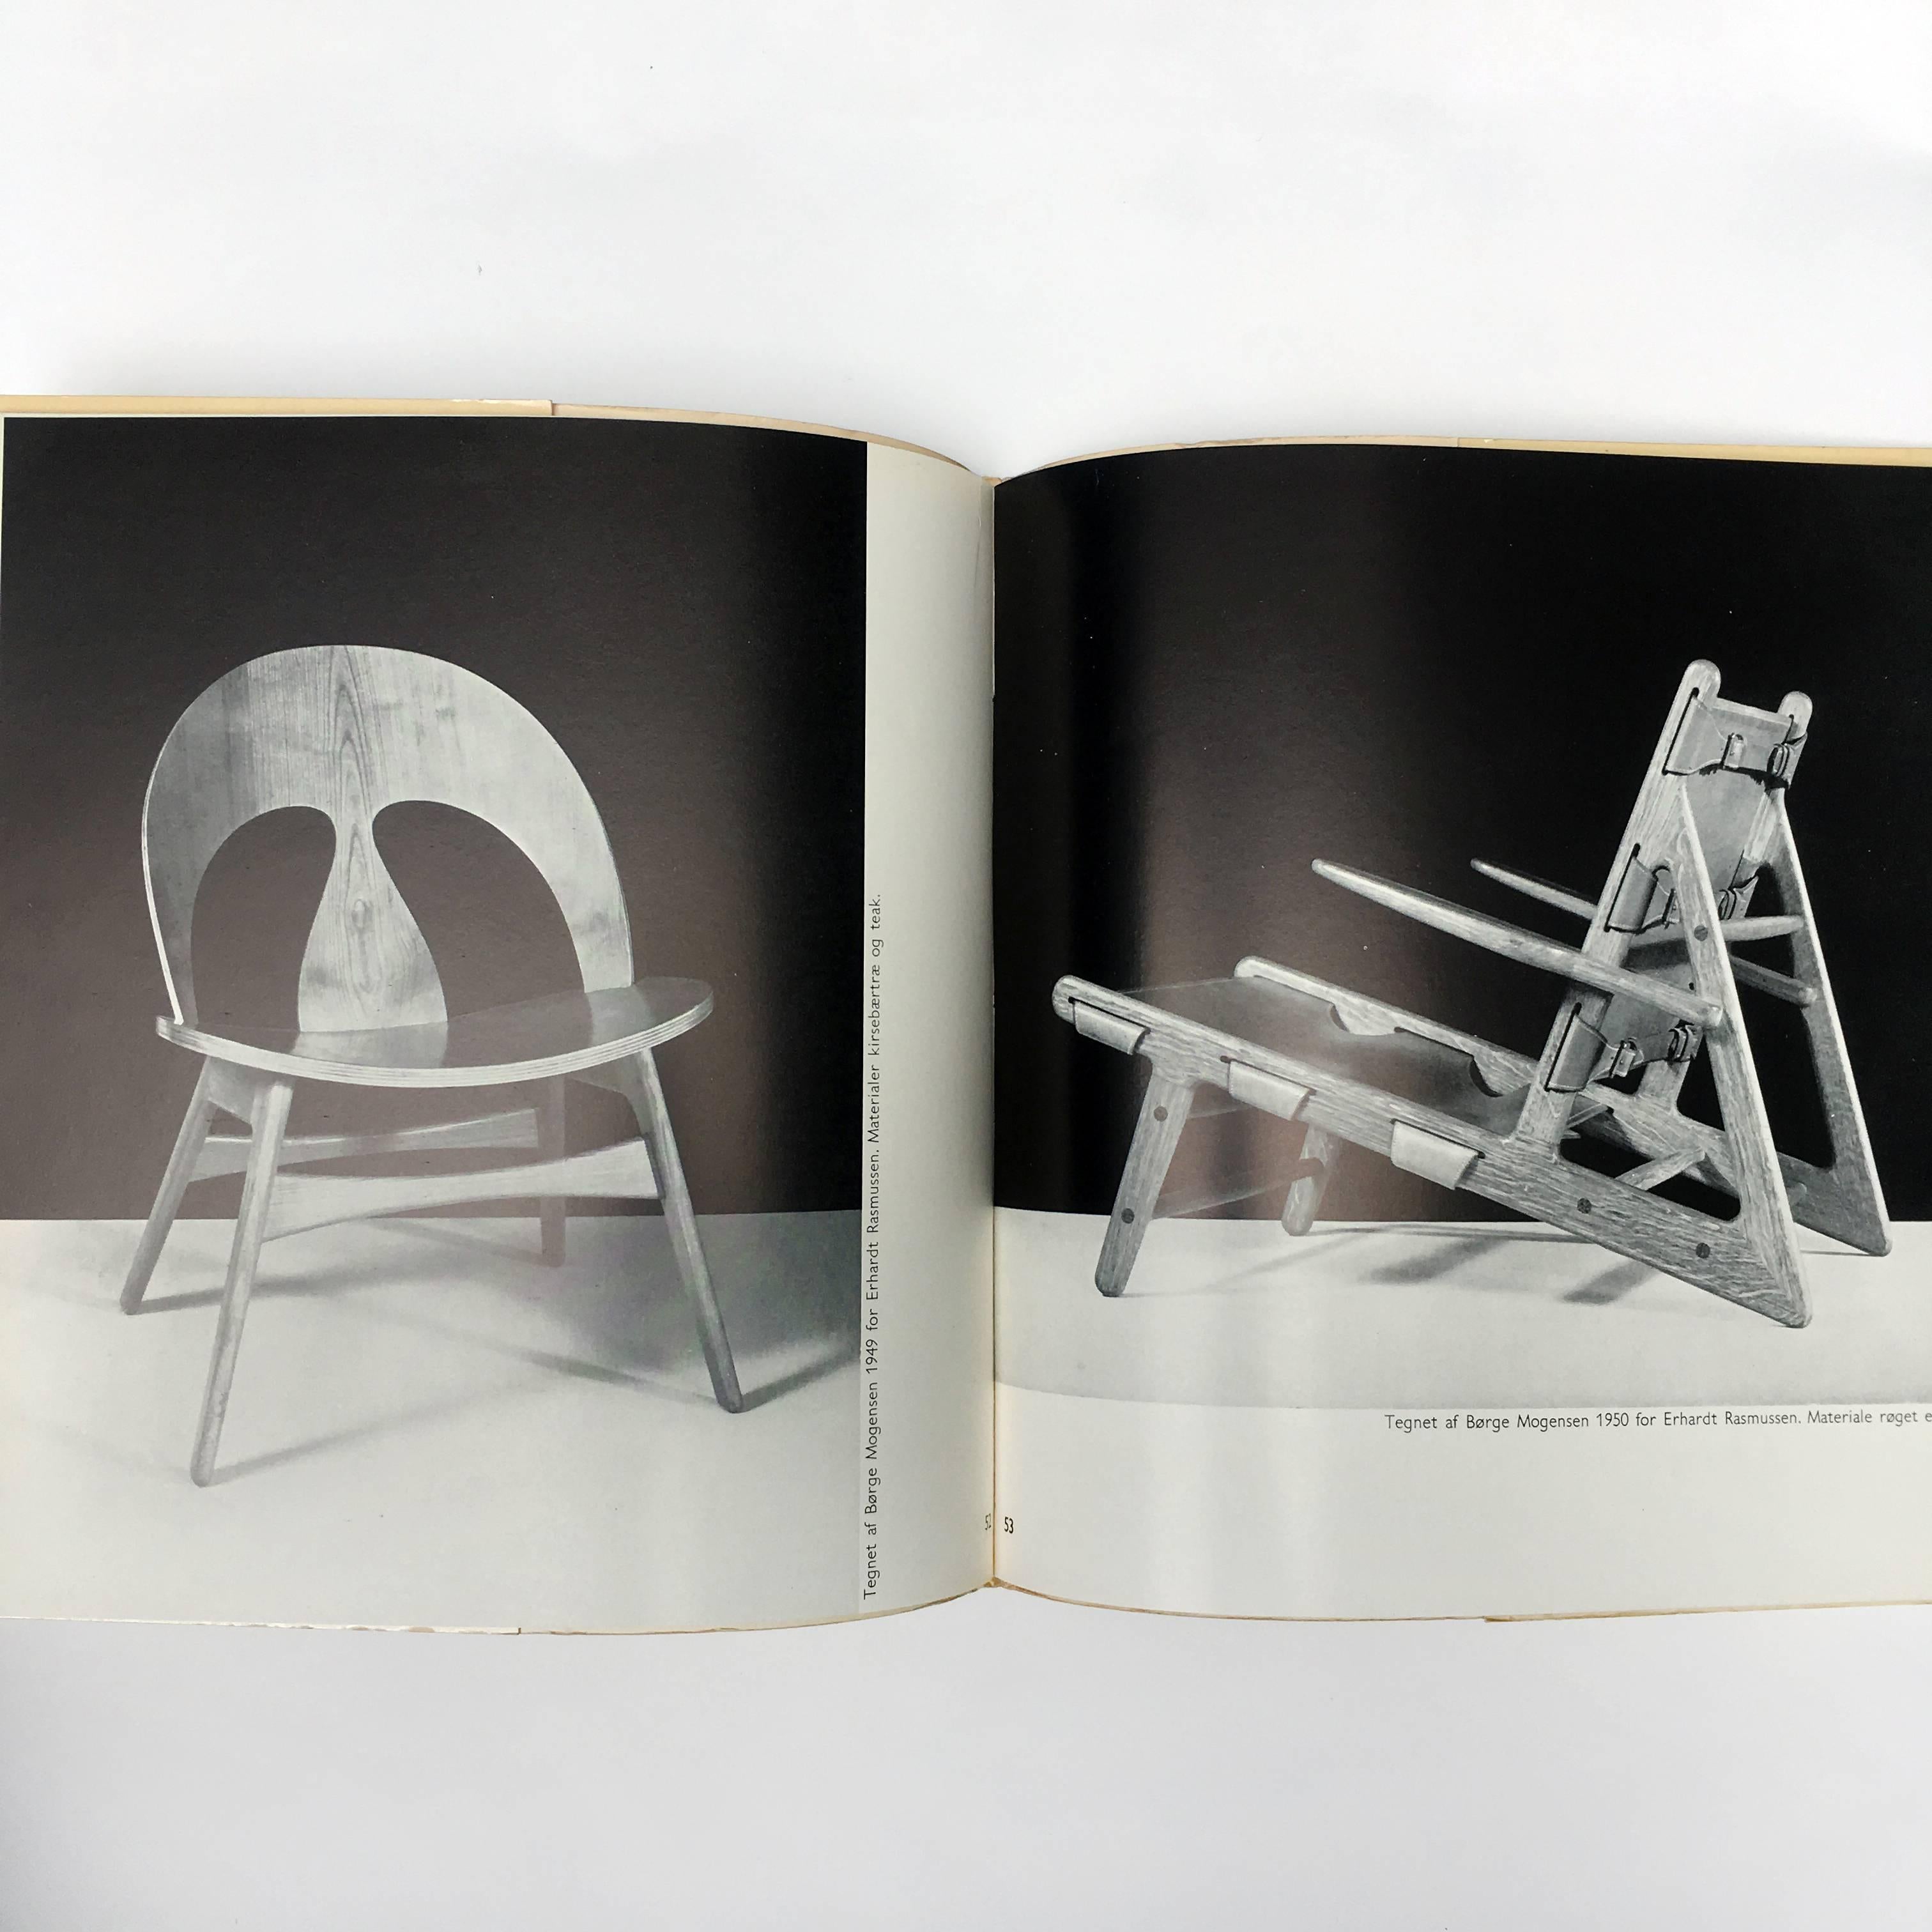 First edition, published by Høst & Søns Forlag København, 1954

An important document of Danish chair design during the early 1950s, showing many of the aesthetic and technological developments coming out of Denmark during the period. The use of